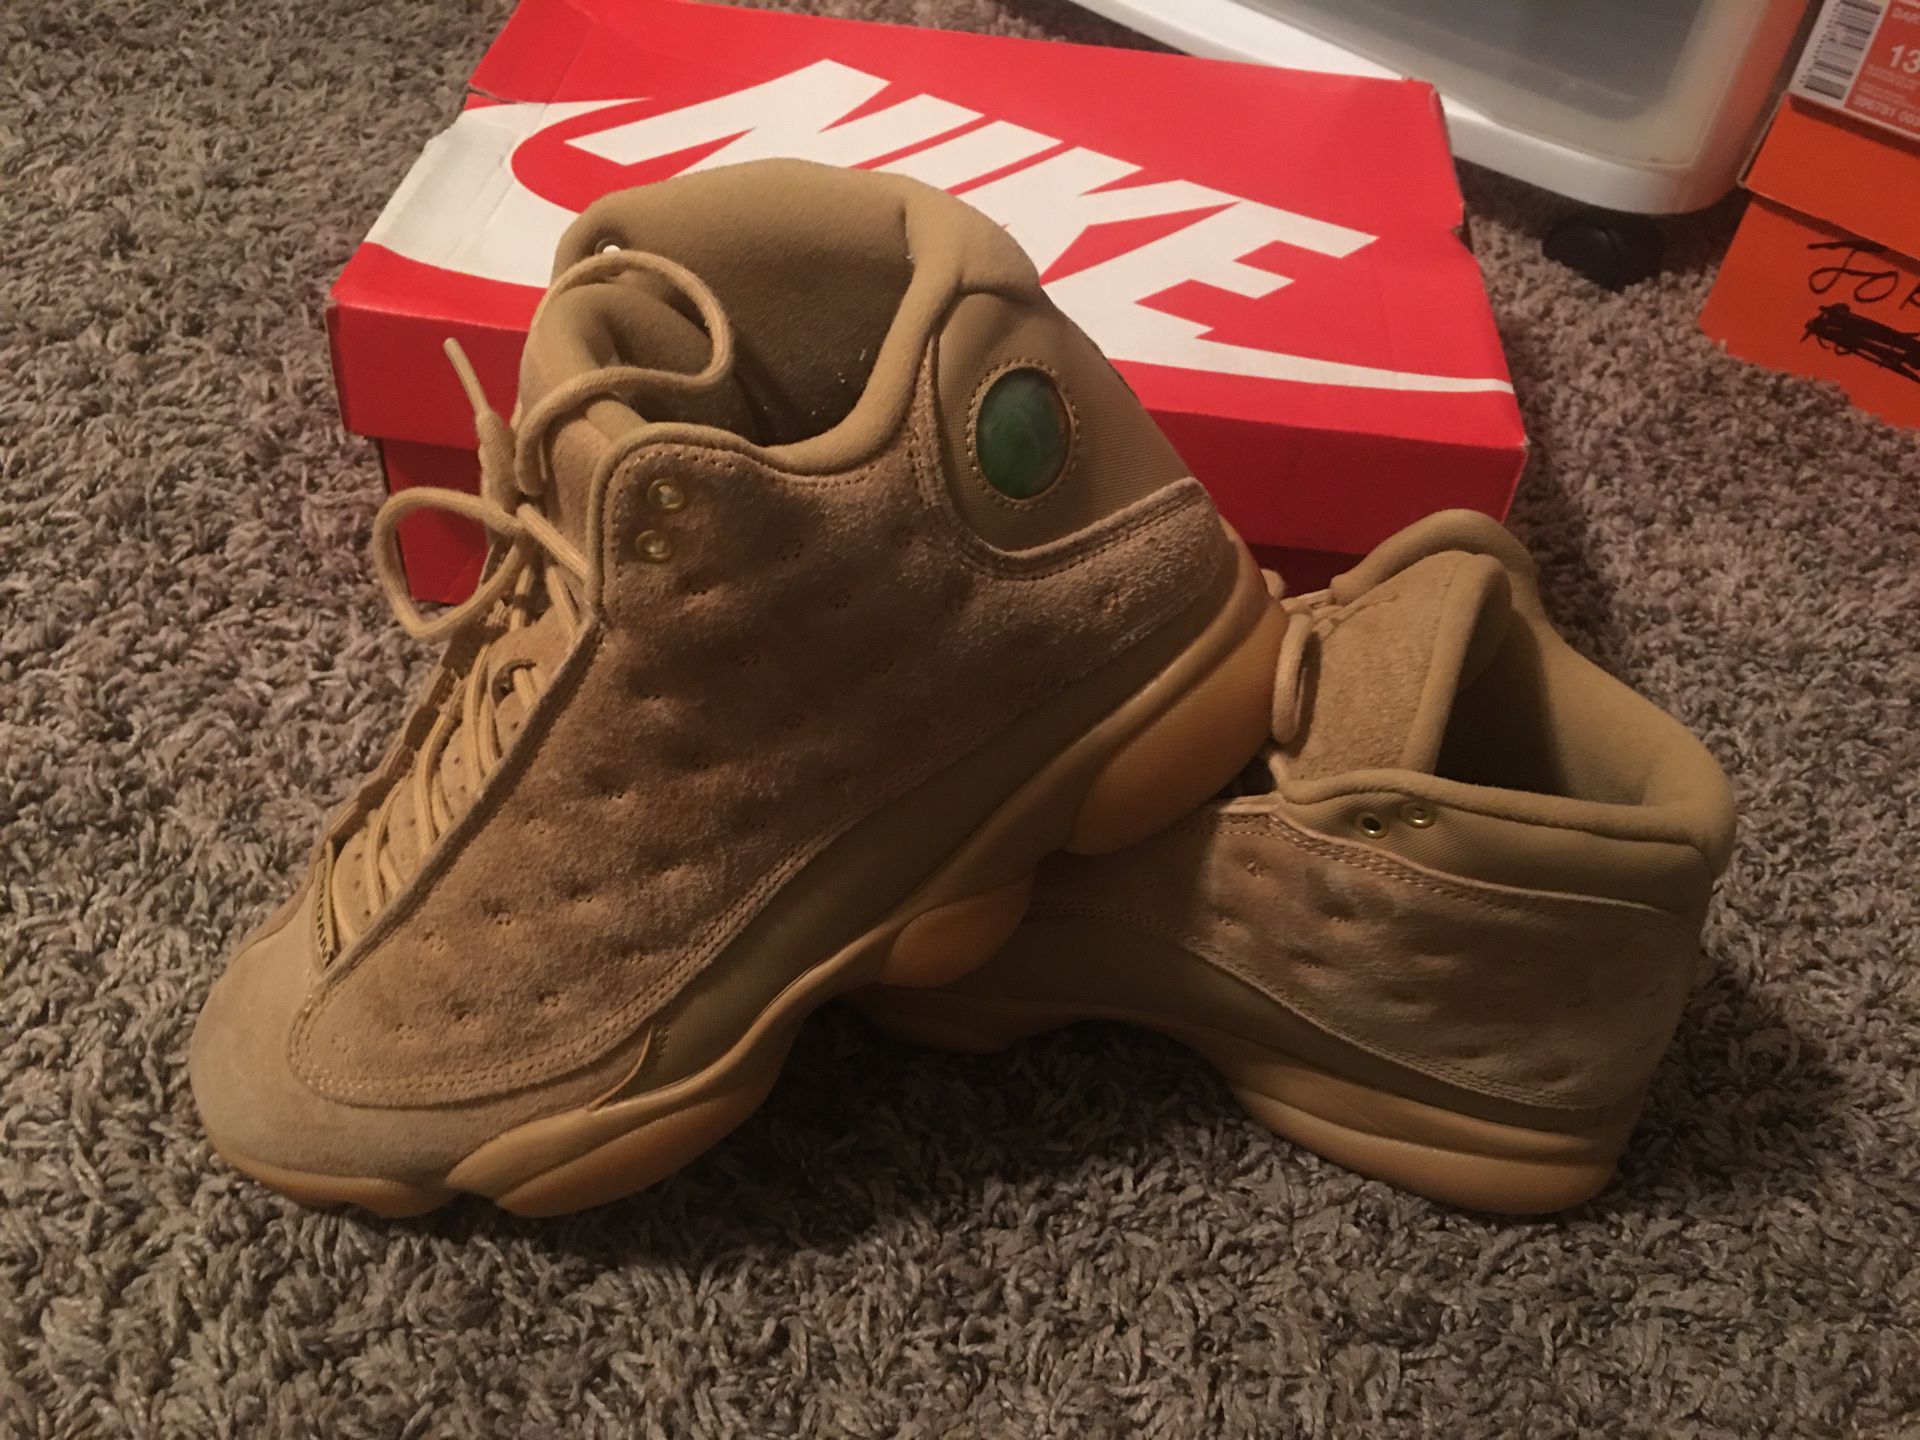 Jordan retro 13 wheat only wore 1 time like new (size 81/2